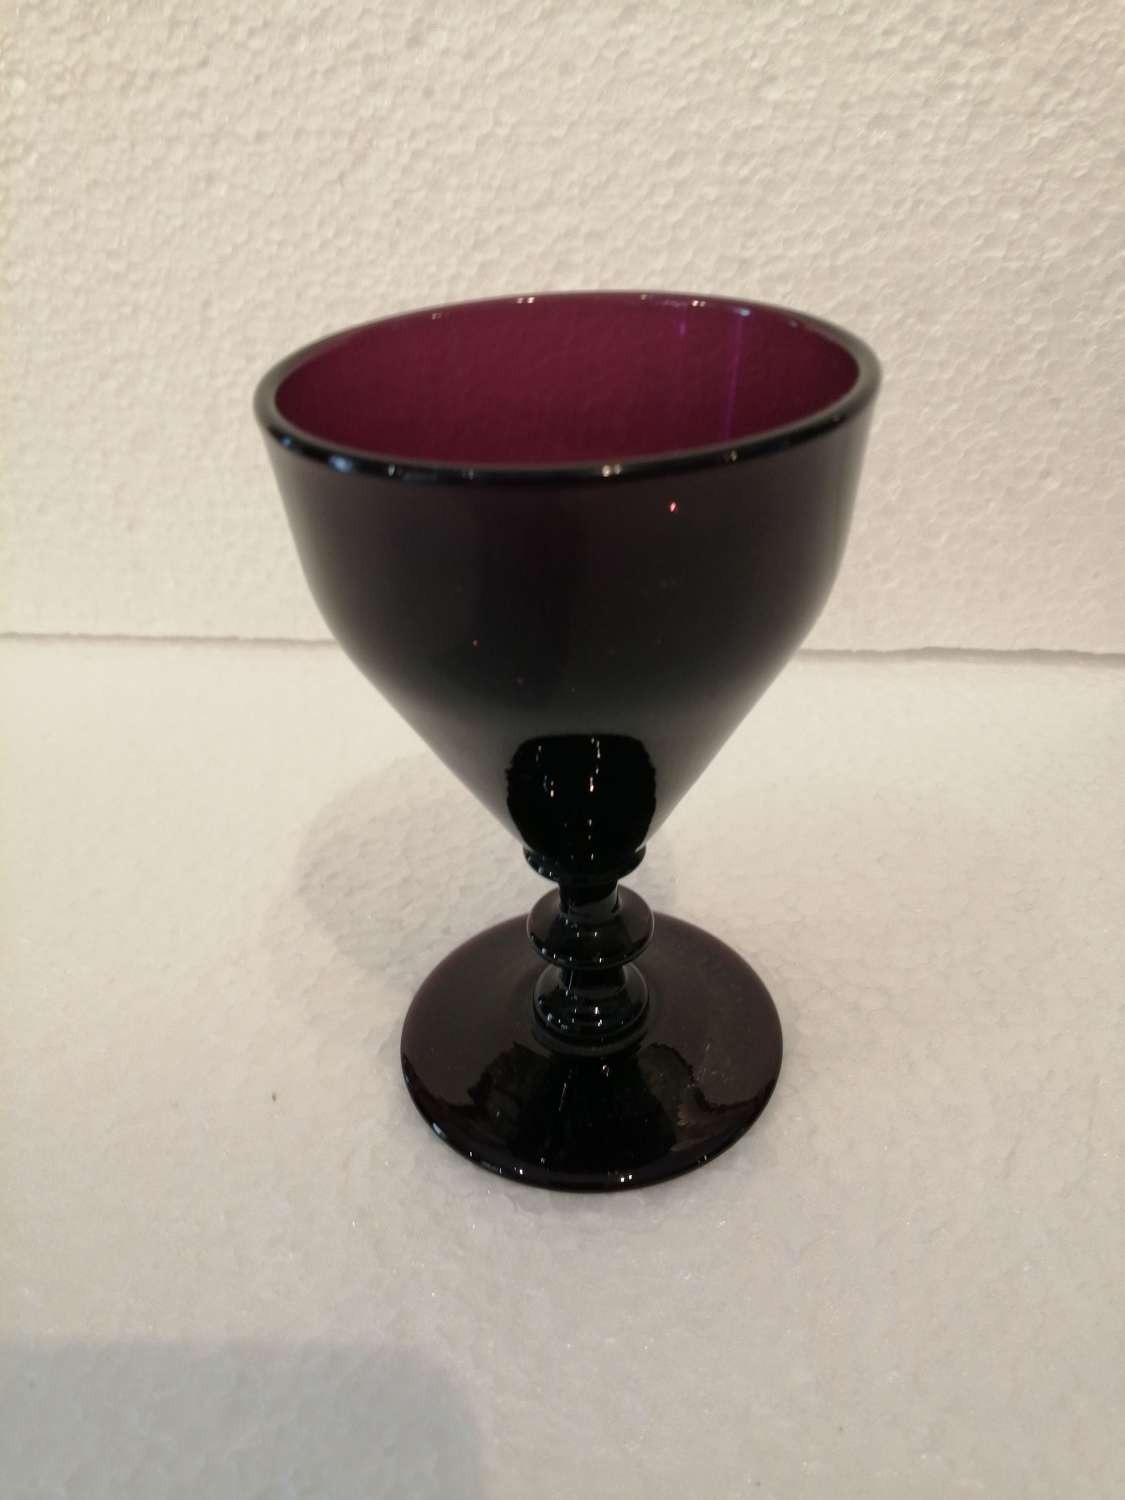 An exquisite amethyst glass goblet